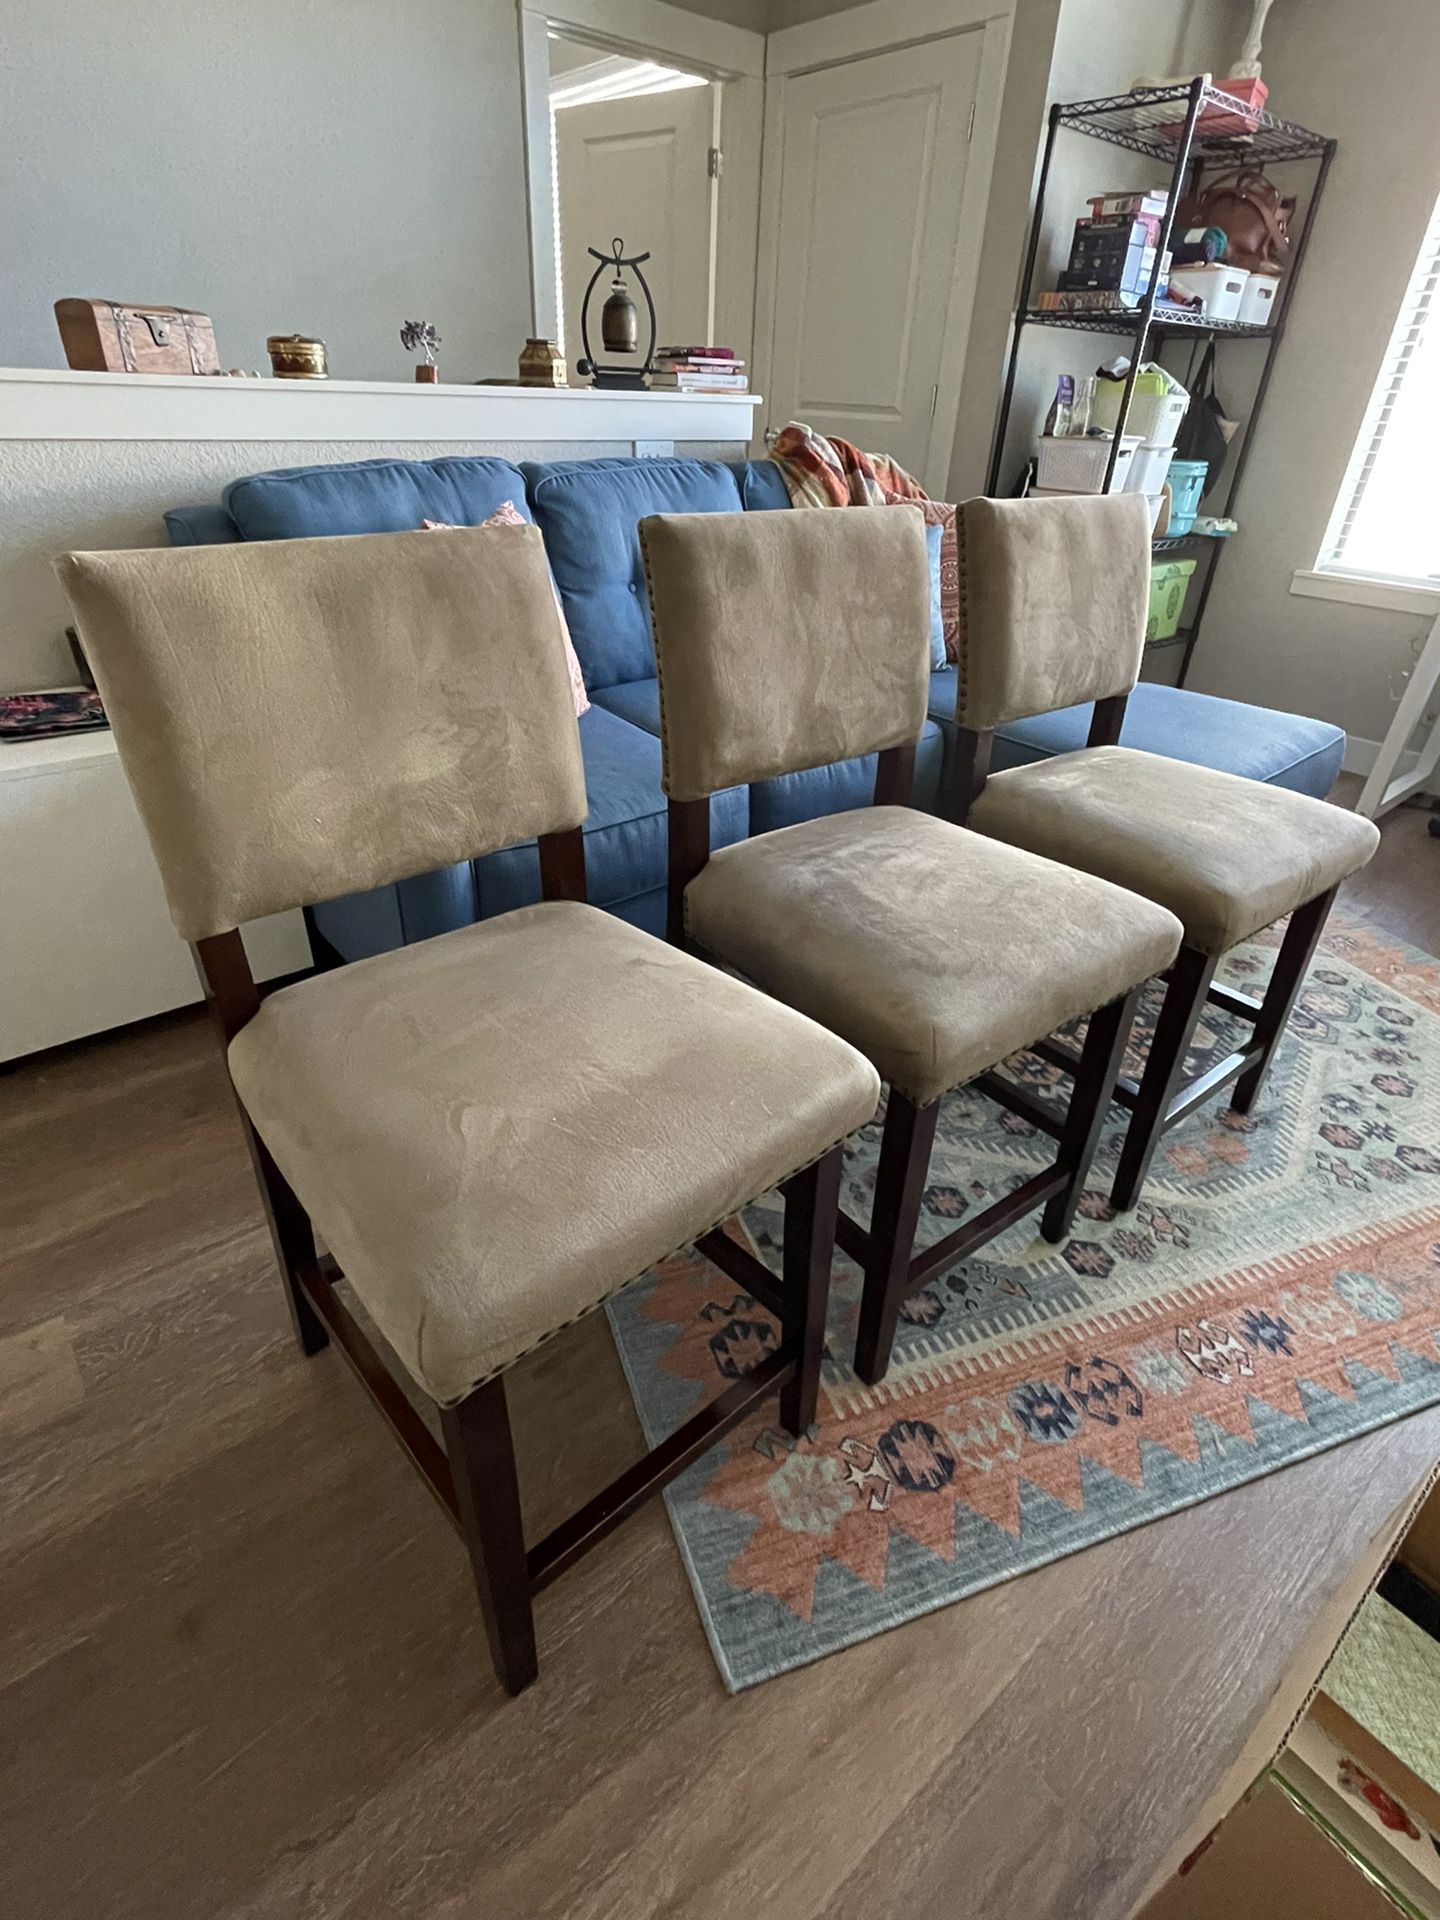 3 Suede Barstools (counter height) Great Condition!